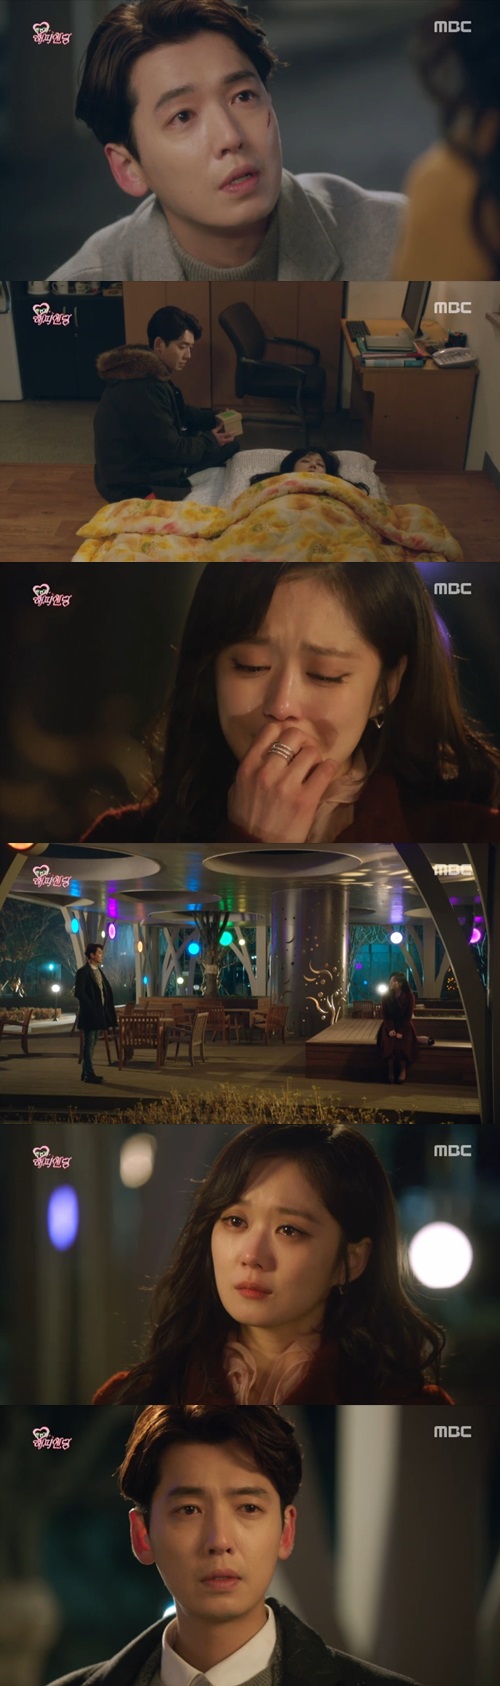 'One More Happpy Ending' Jang Nara bursts into tears after realizing Jeong Kyeong-ho's love for her